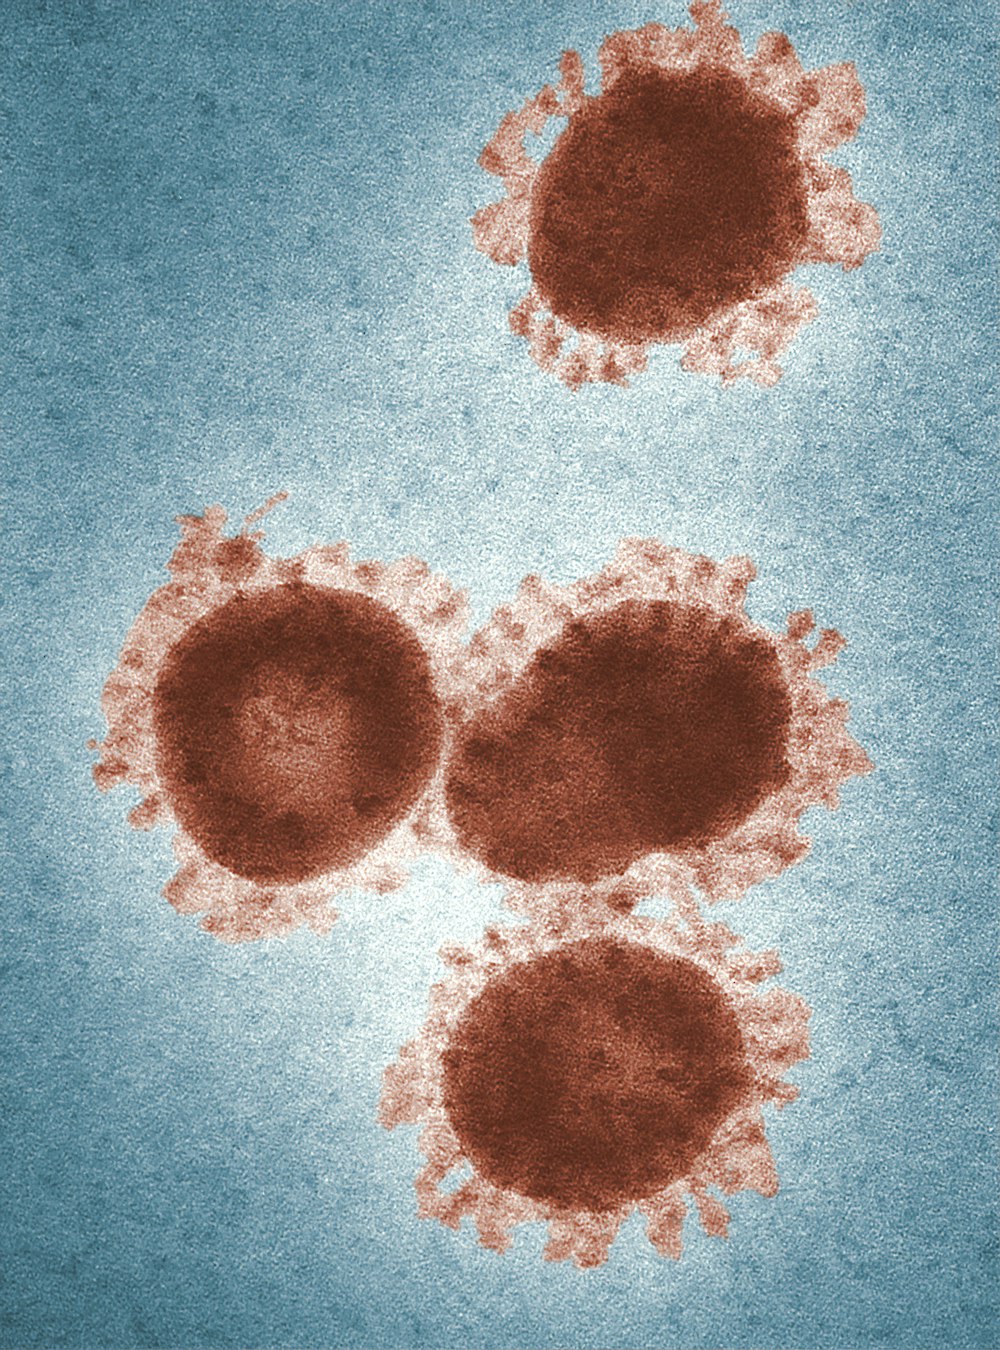 a group of brown circles sitting on top of a blue surface